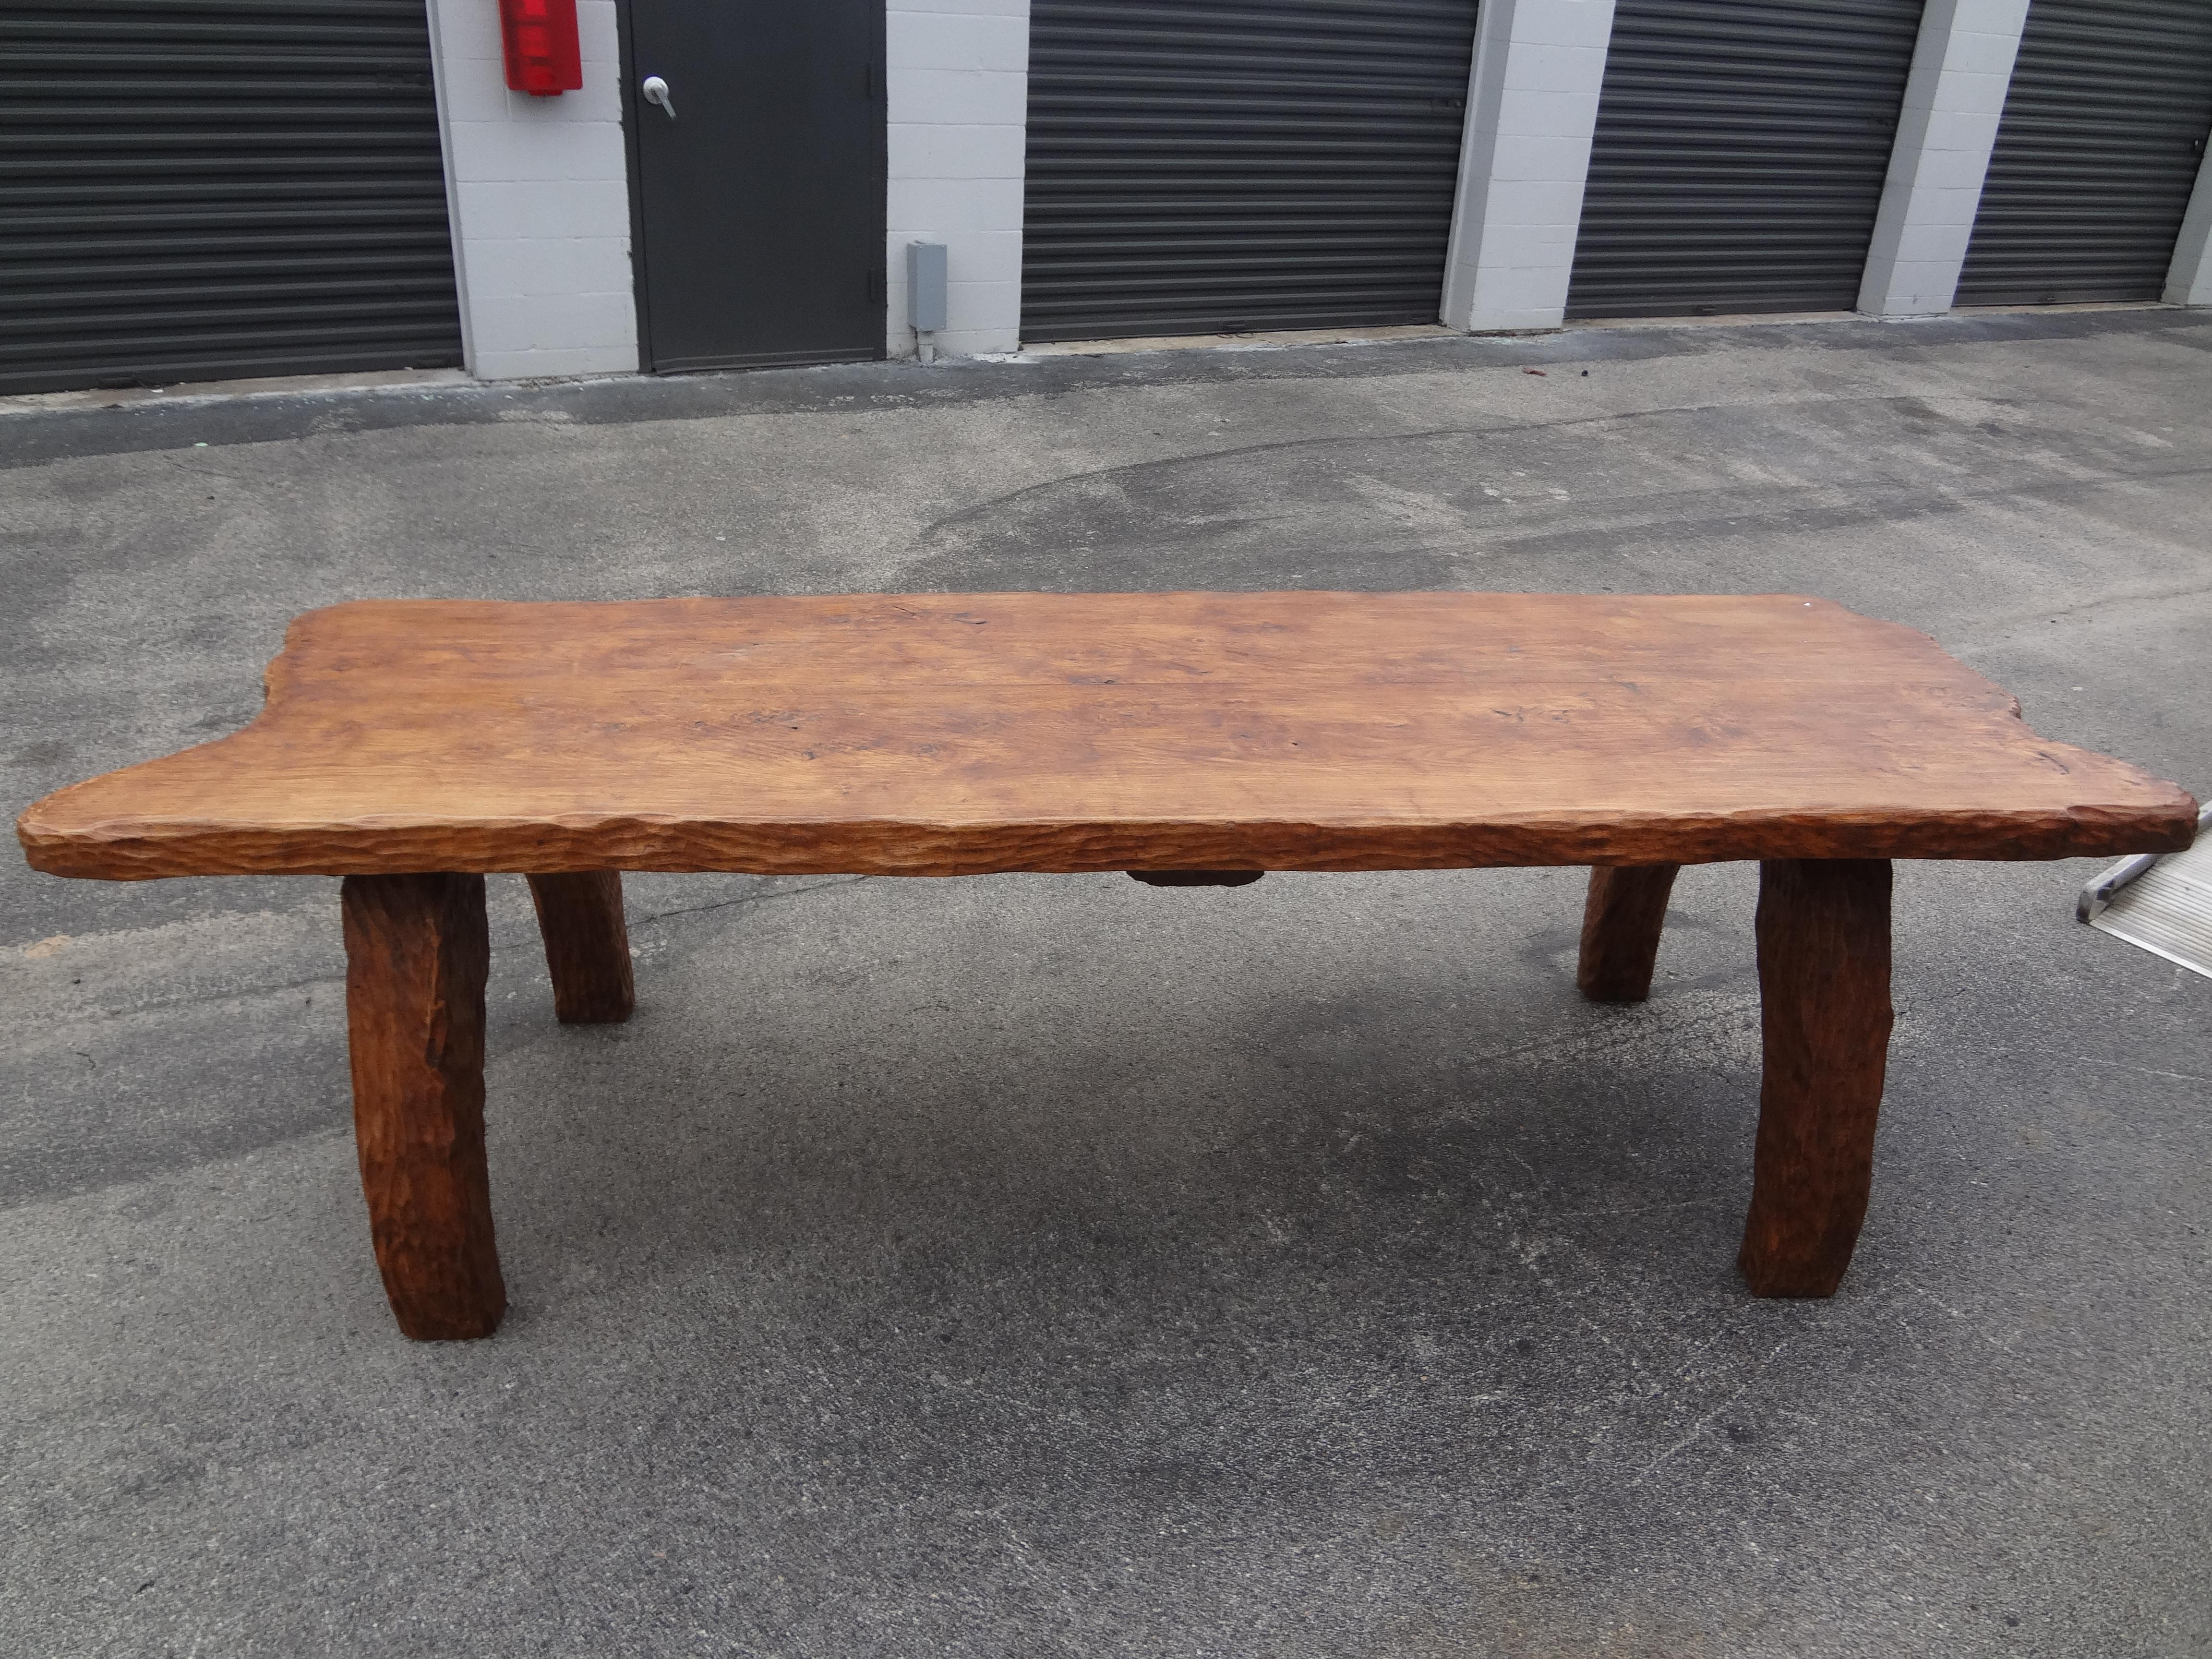 French Brutalist Elm Dining Table Or Center Table By Atelier Marolles.
Handsome and versatile large French Brutalist table by Atelier Marolles. This large table can be used as a dining table, center table or desk. Expertly handmade of Elm wood in a